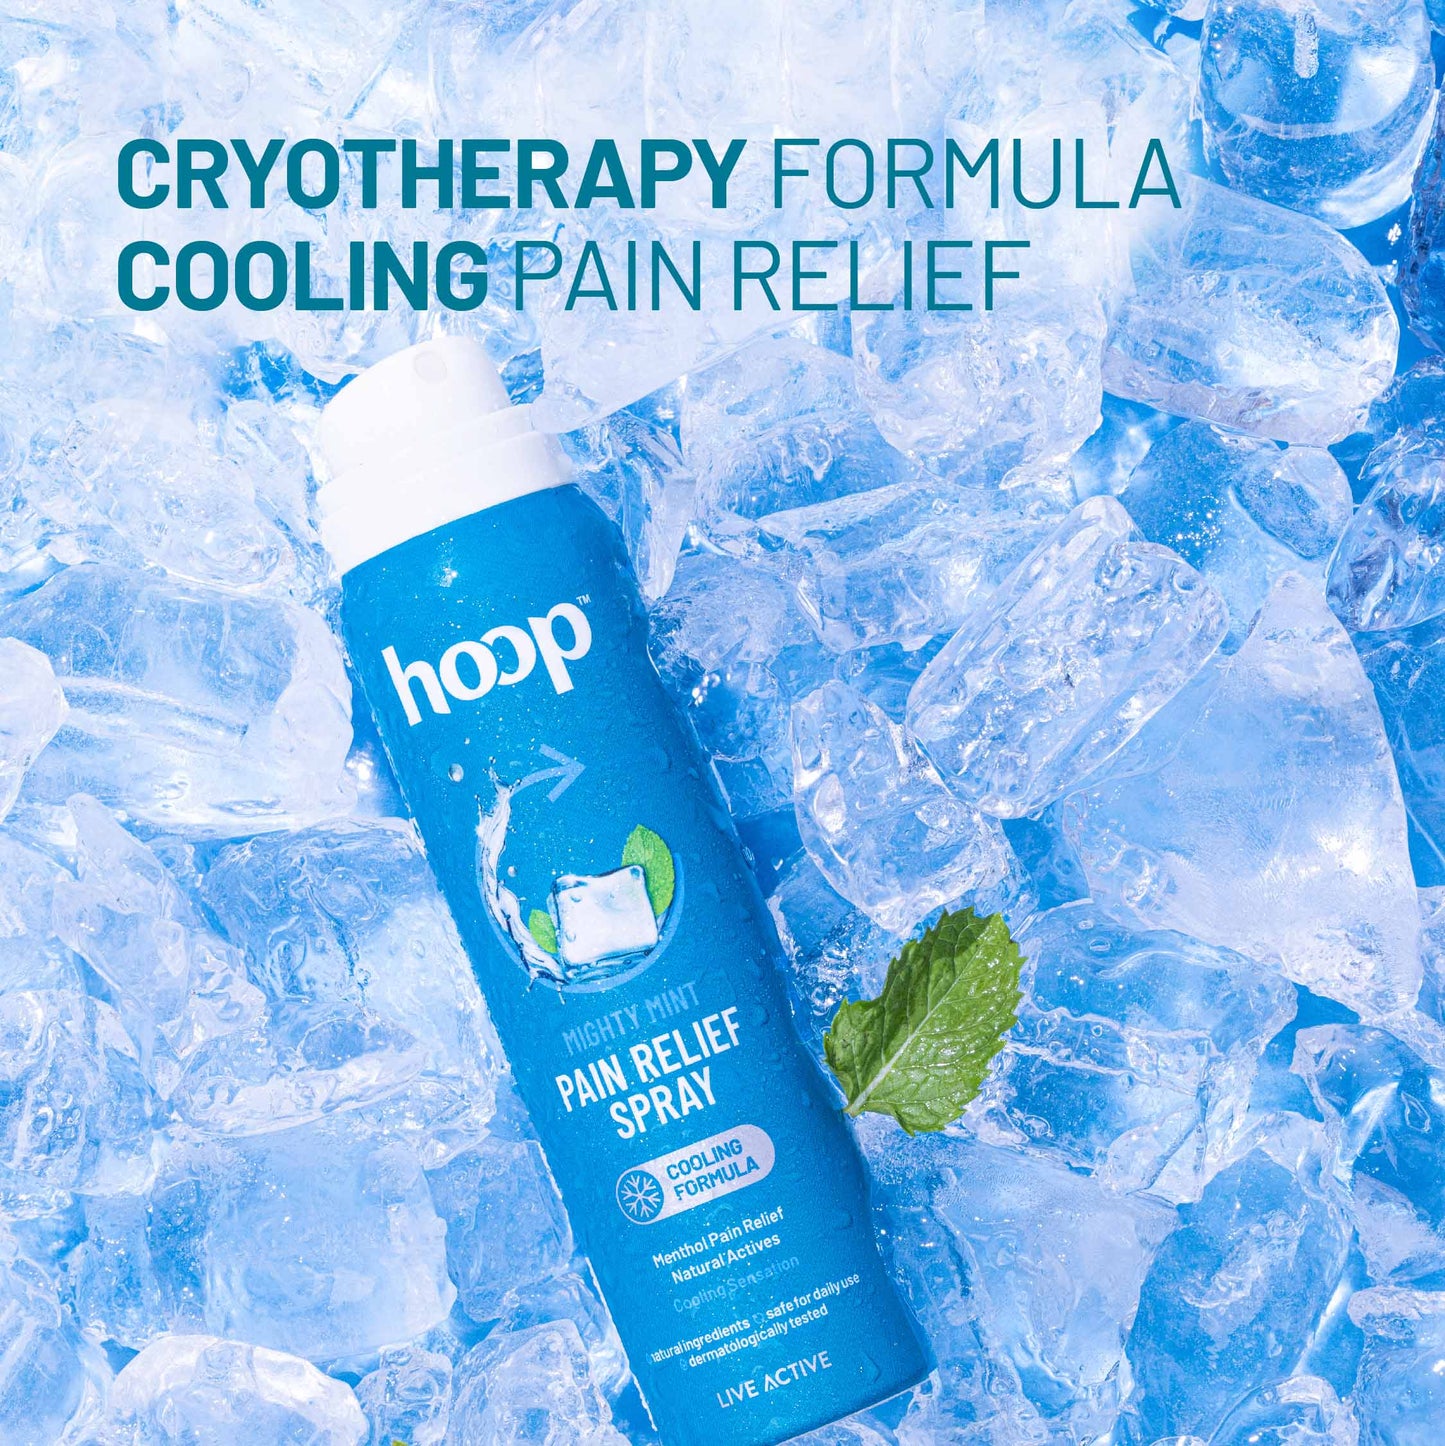 hoop pain relief spray cooling cryotherapy